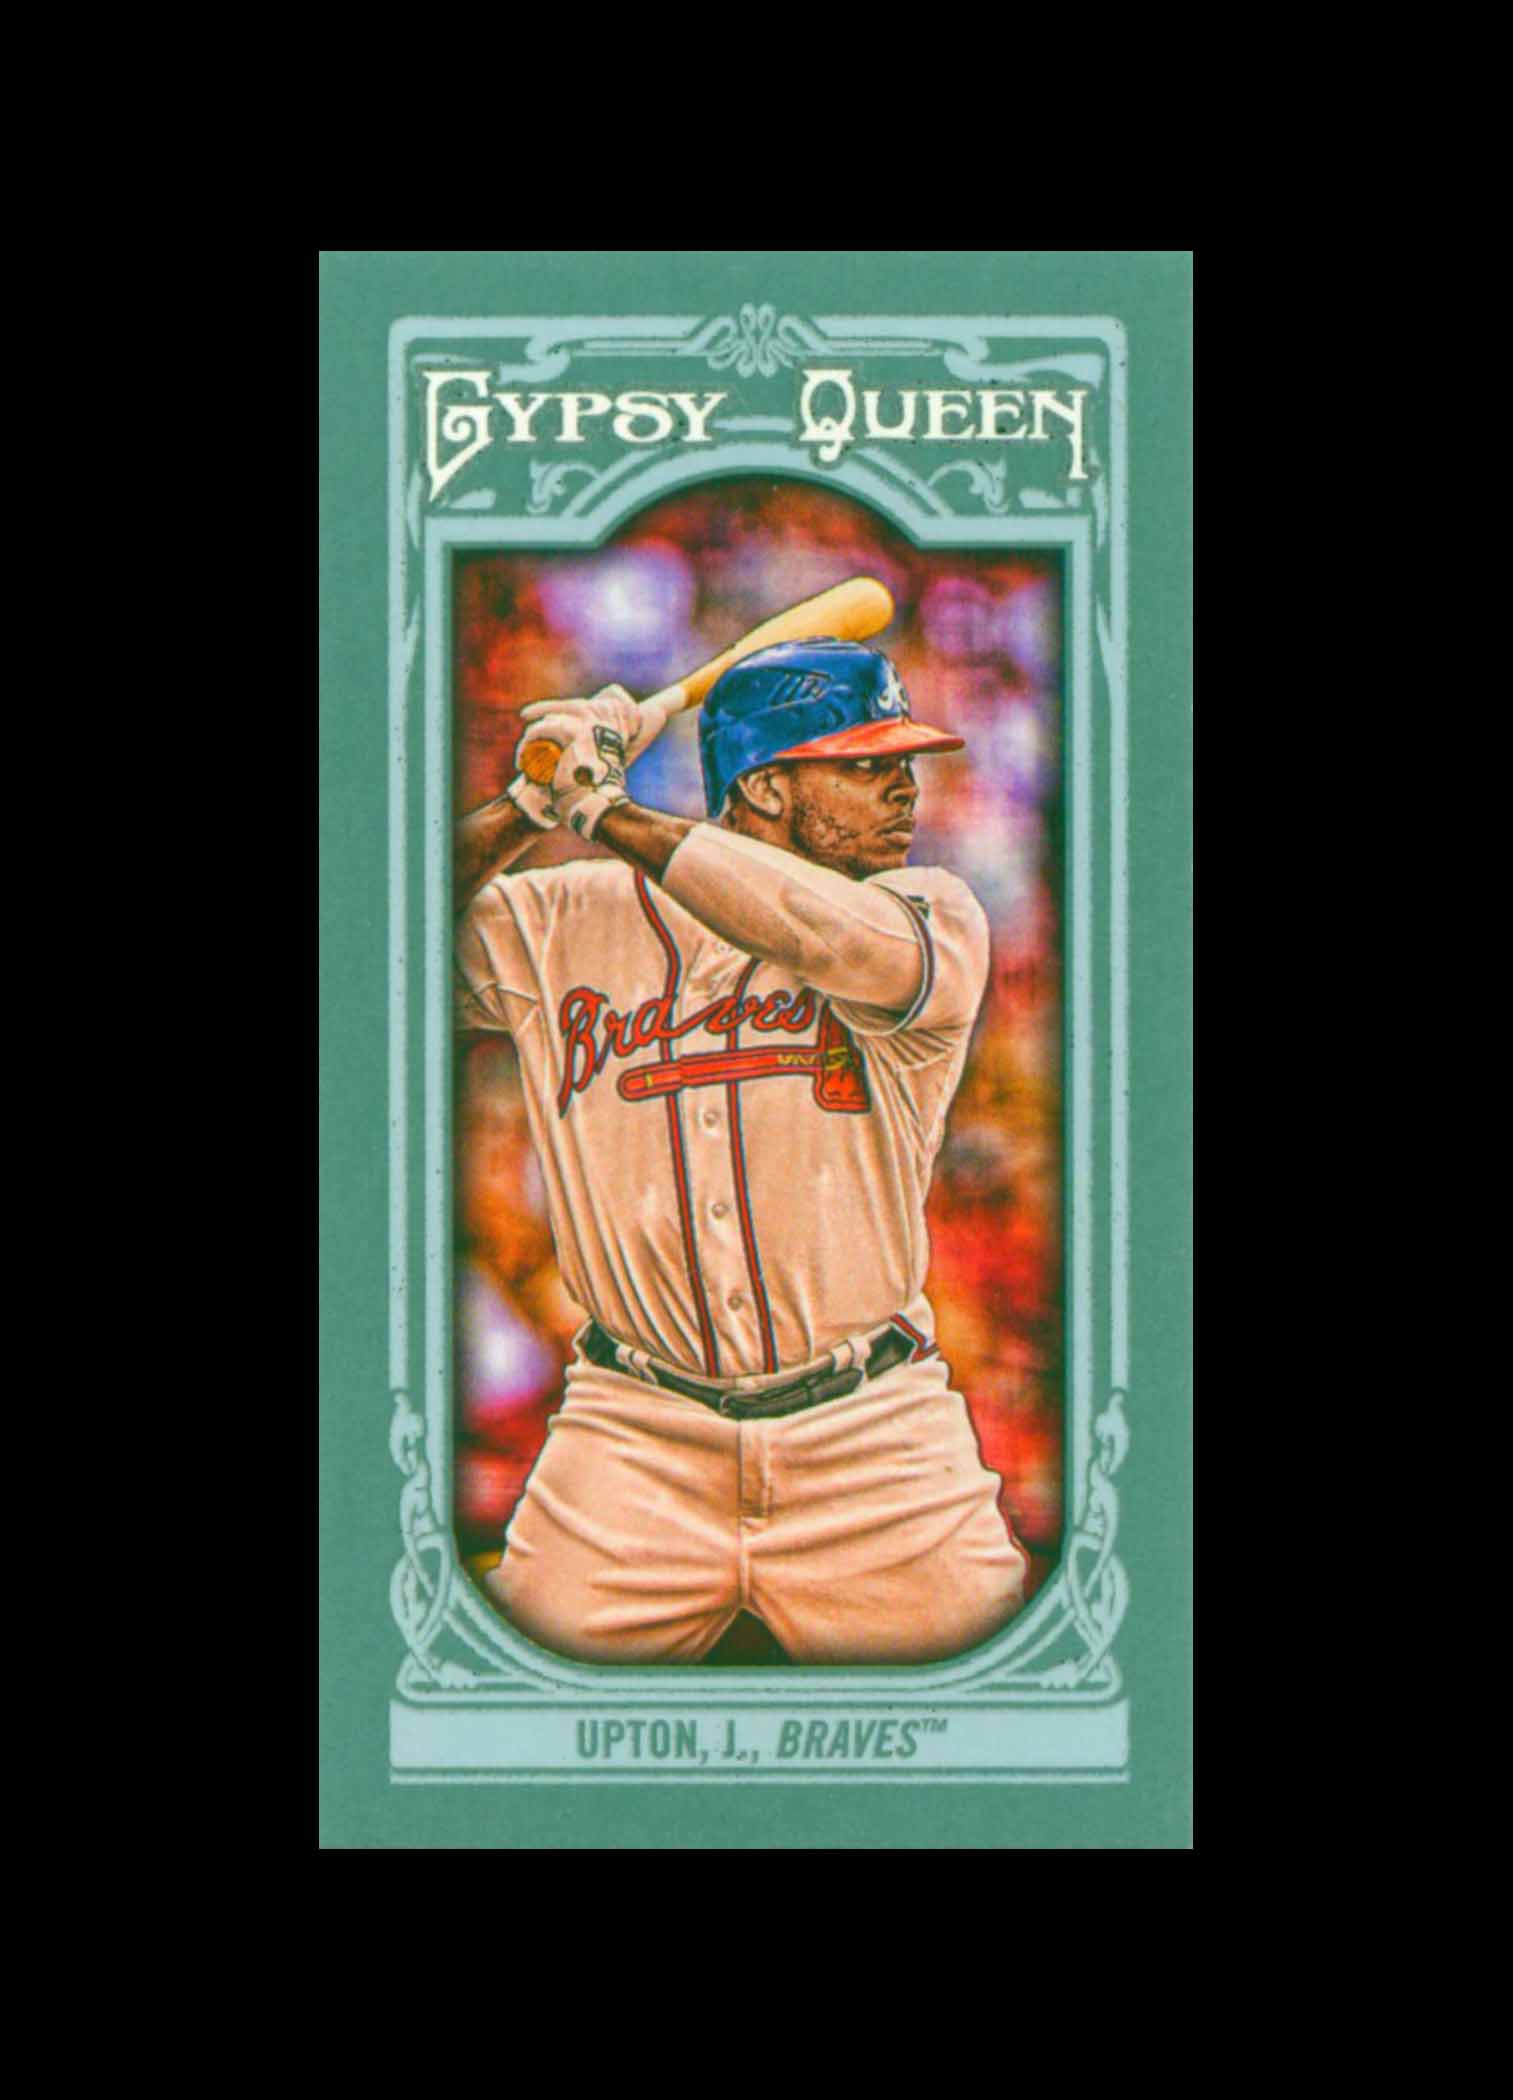 2013 Topps Gypsy Queen Mini Variation